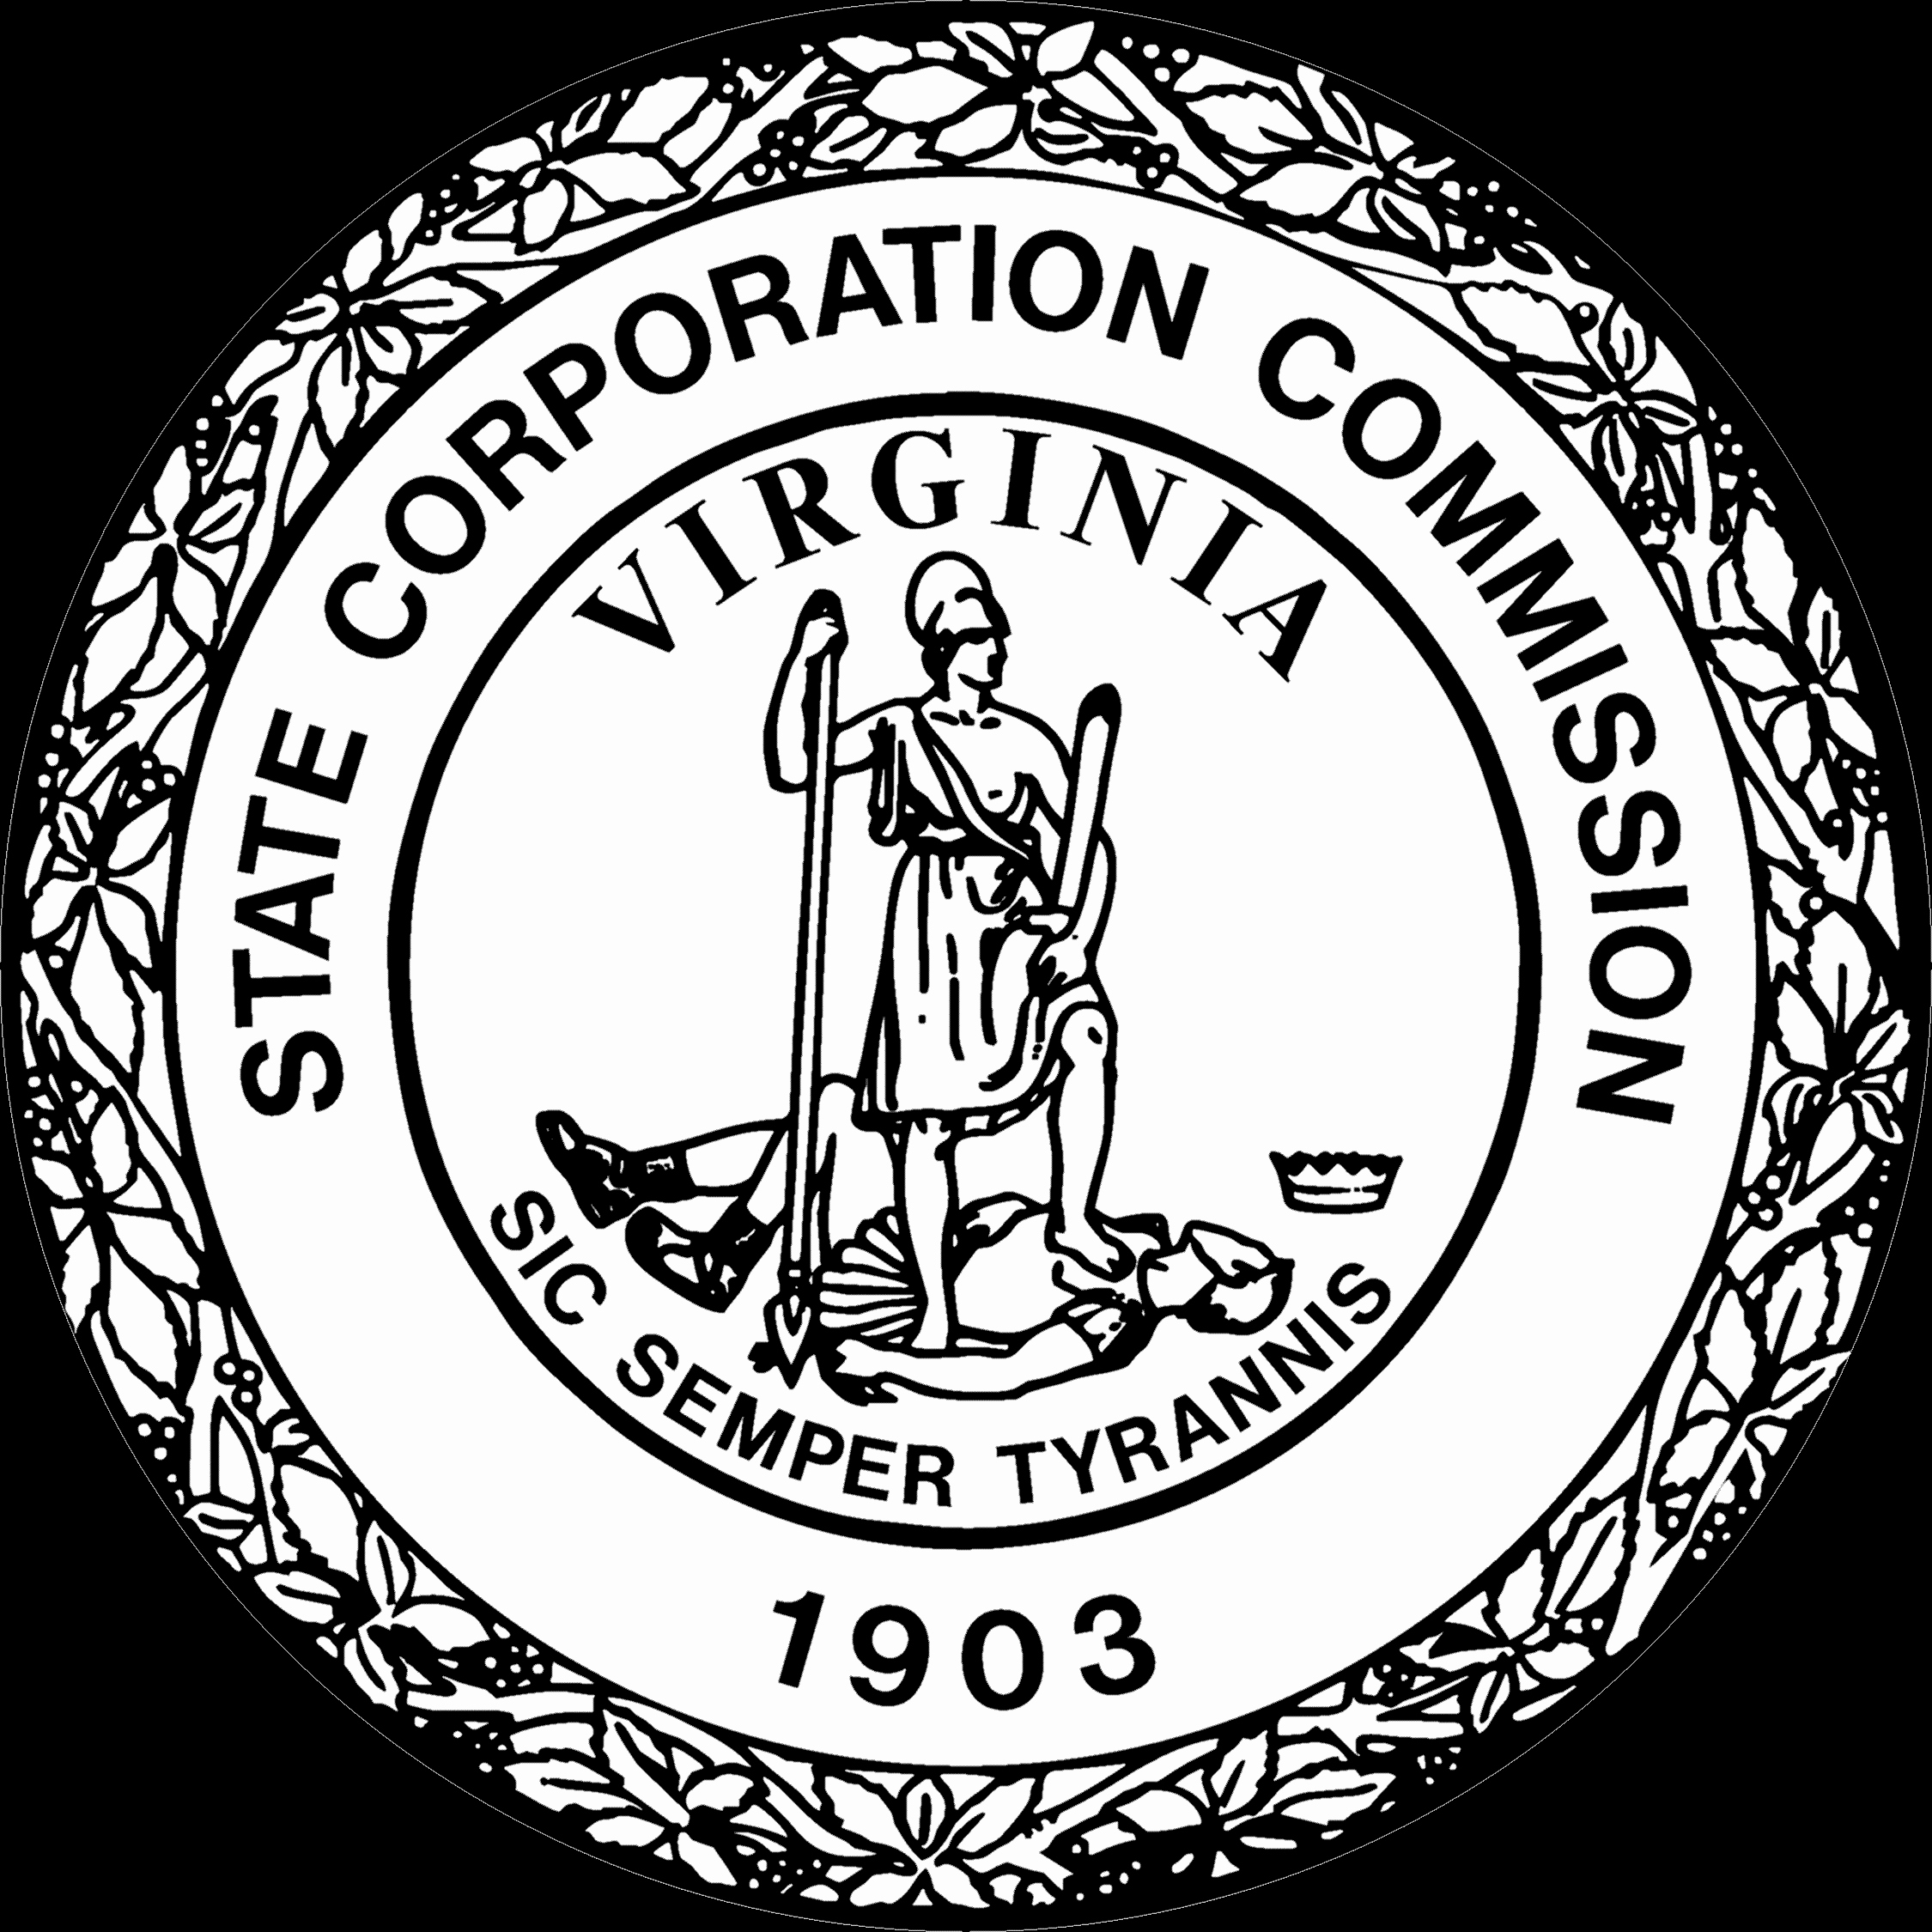 Corporate Seal Template Word New Corporate Seal Template Seal Of the State Corporation